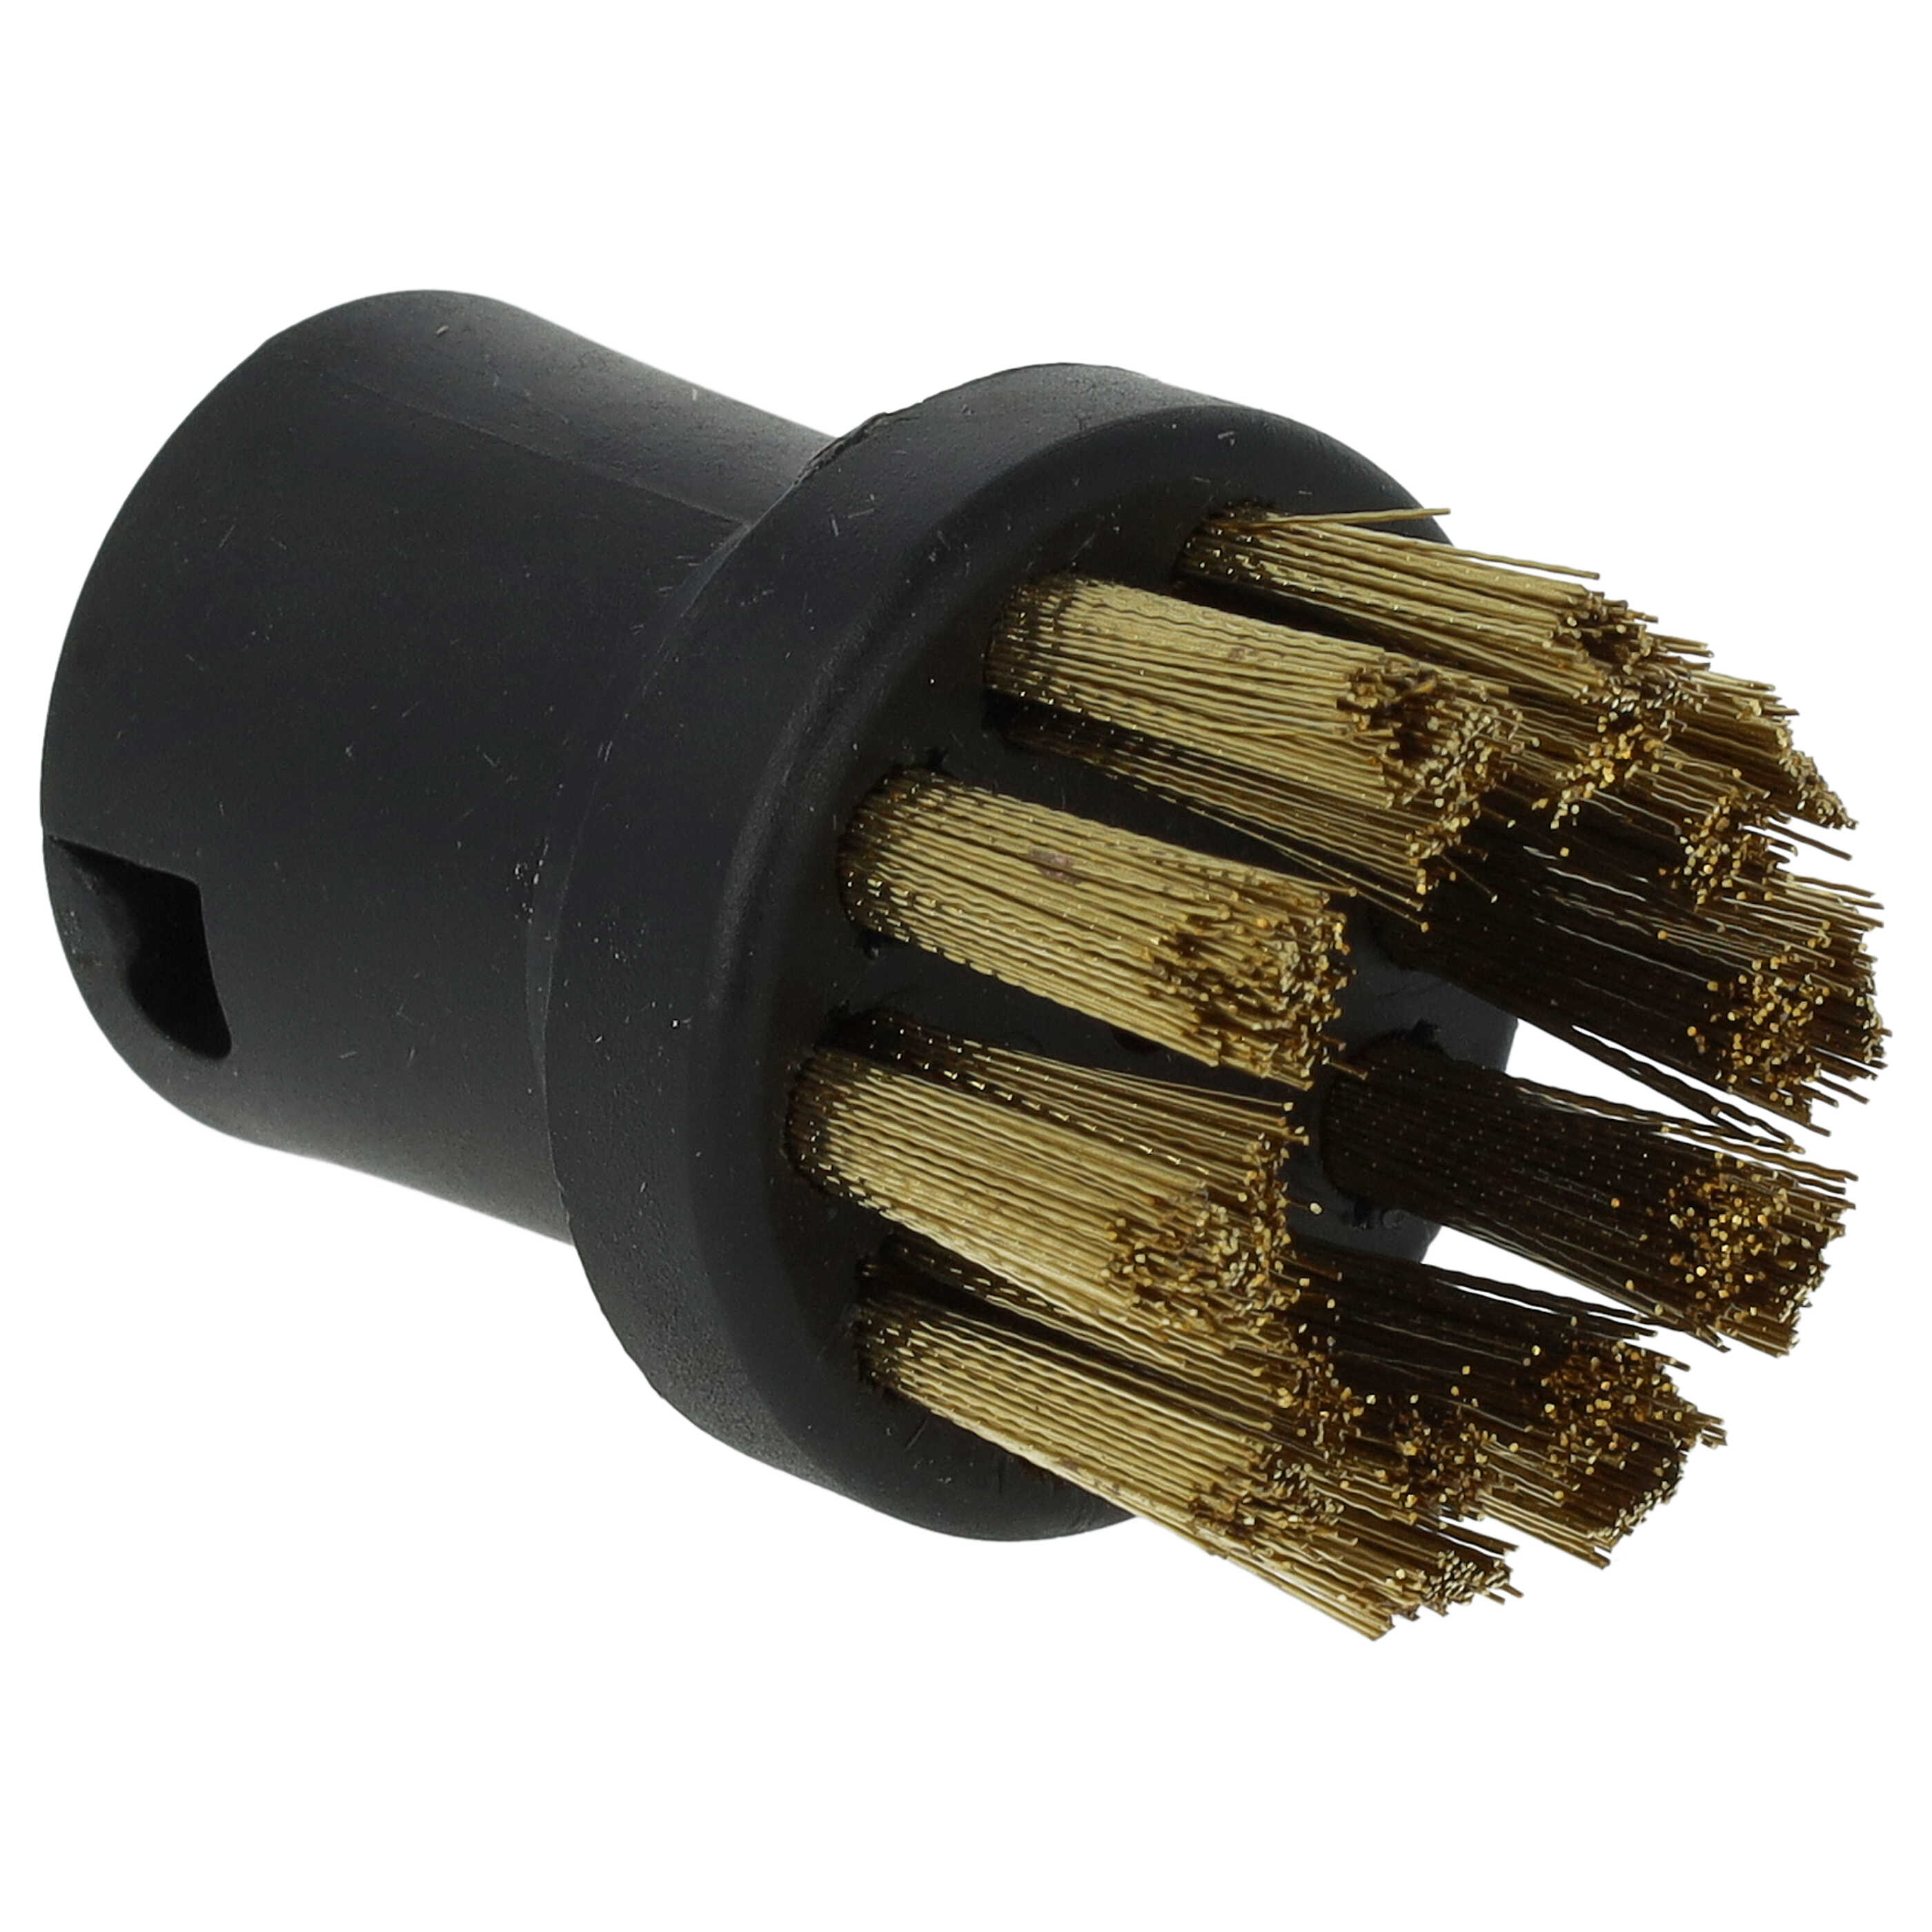 3x Round Brush as Replacement for Kärcher 2.863-075.0, 2.863-061.0 for Kärcher Steam Cleaner